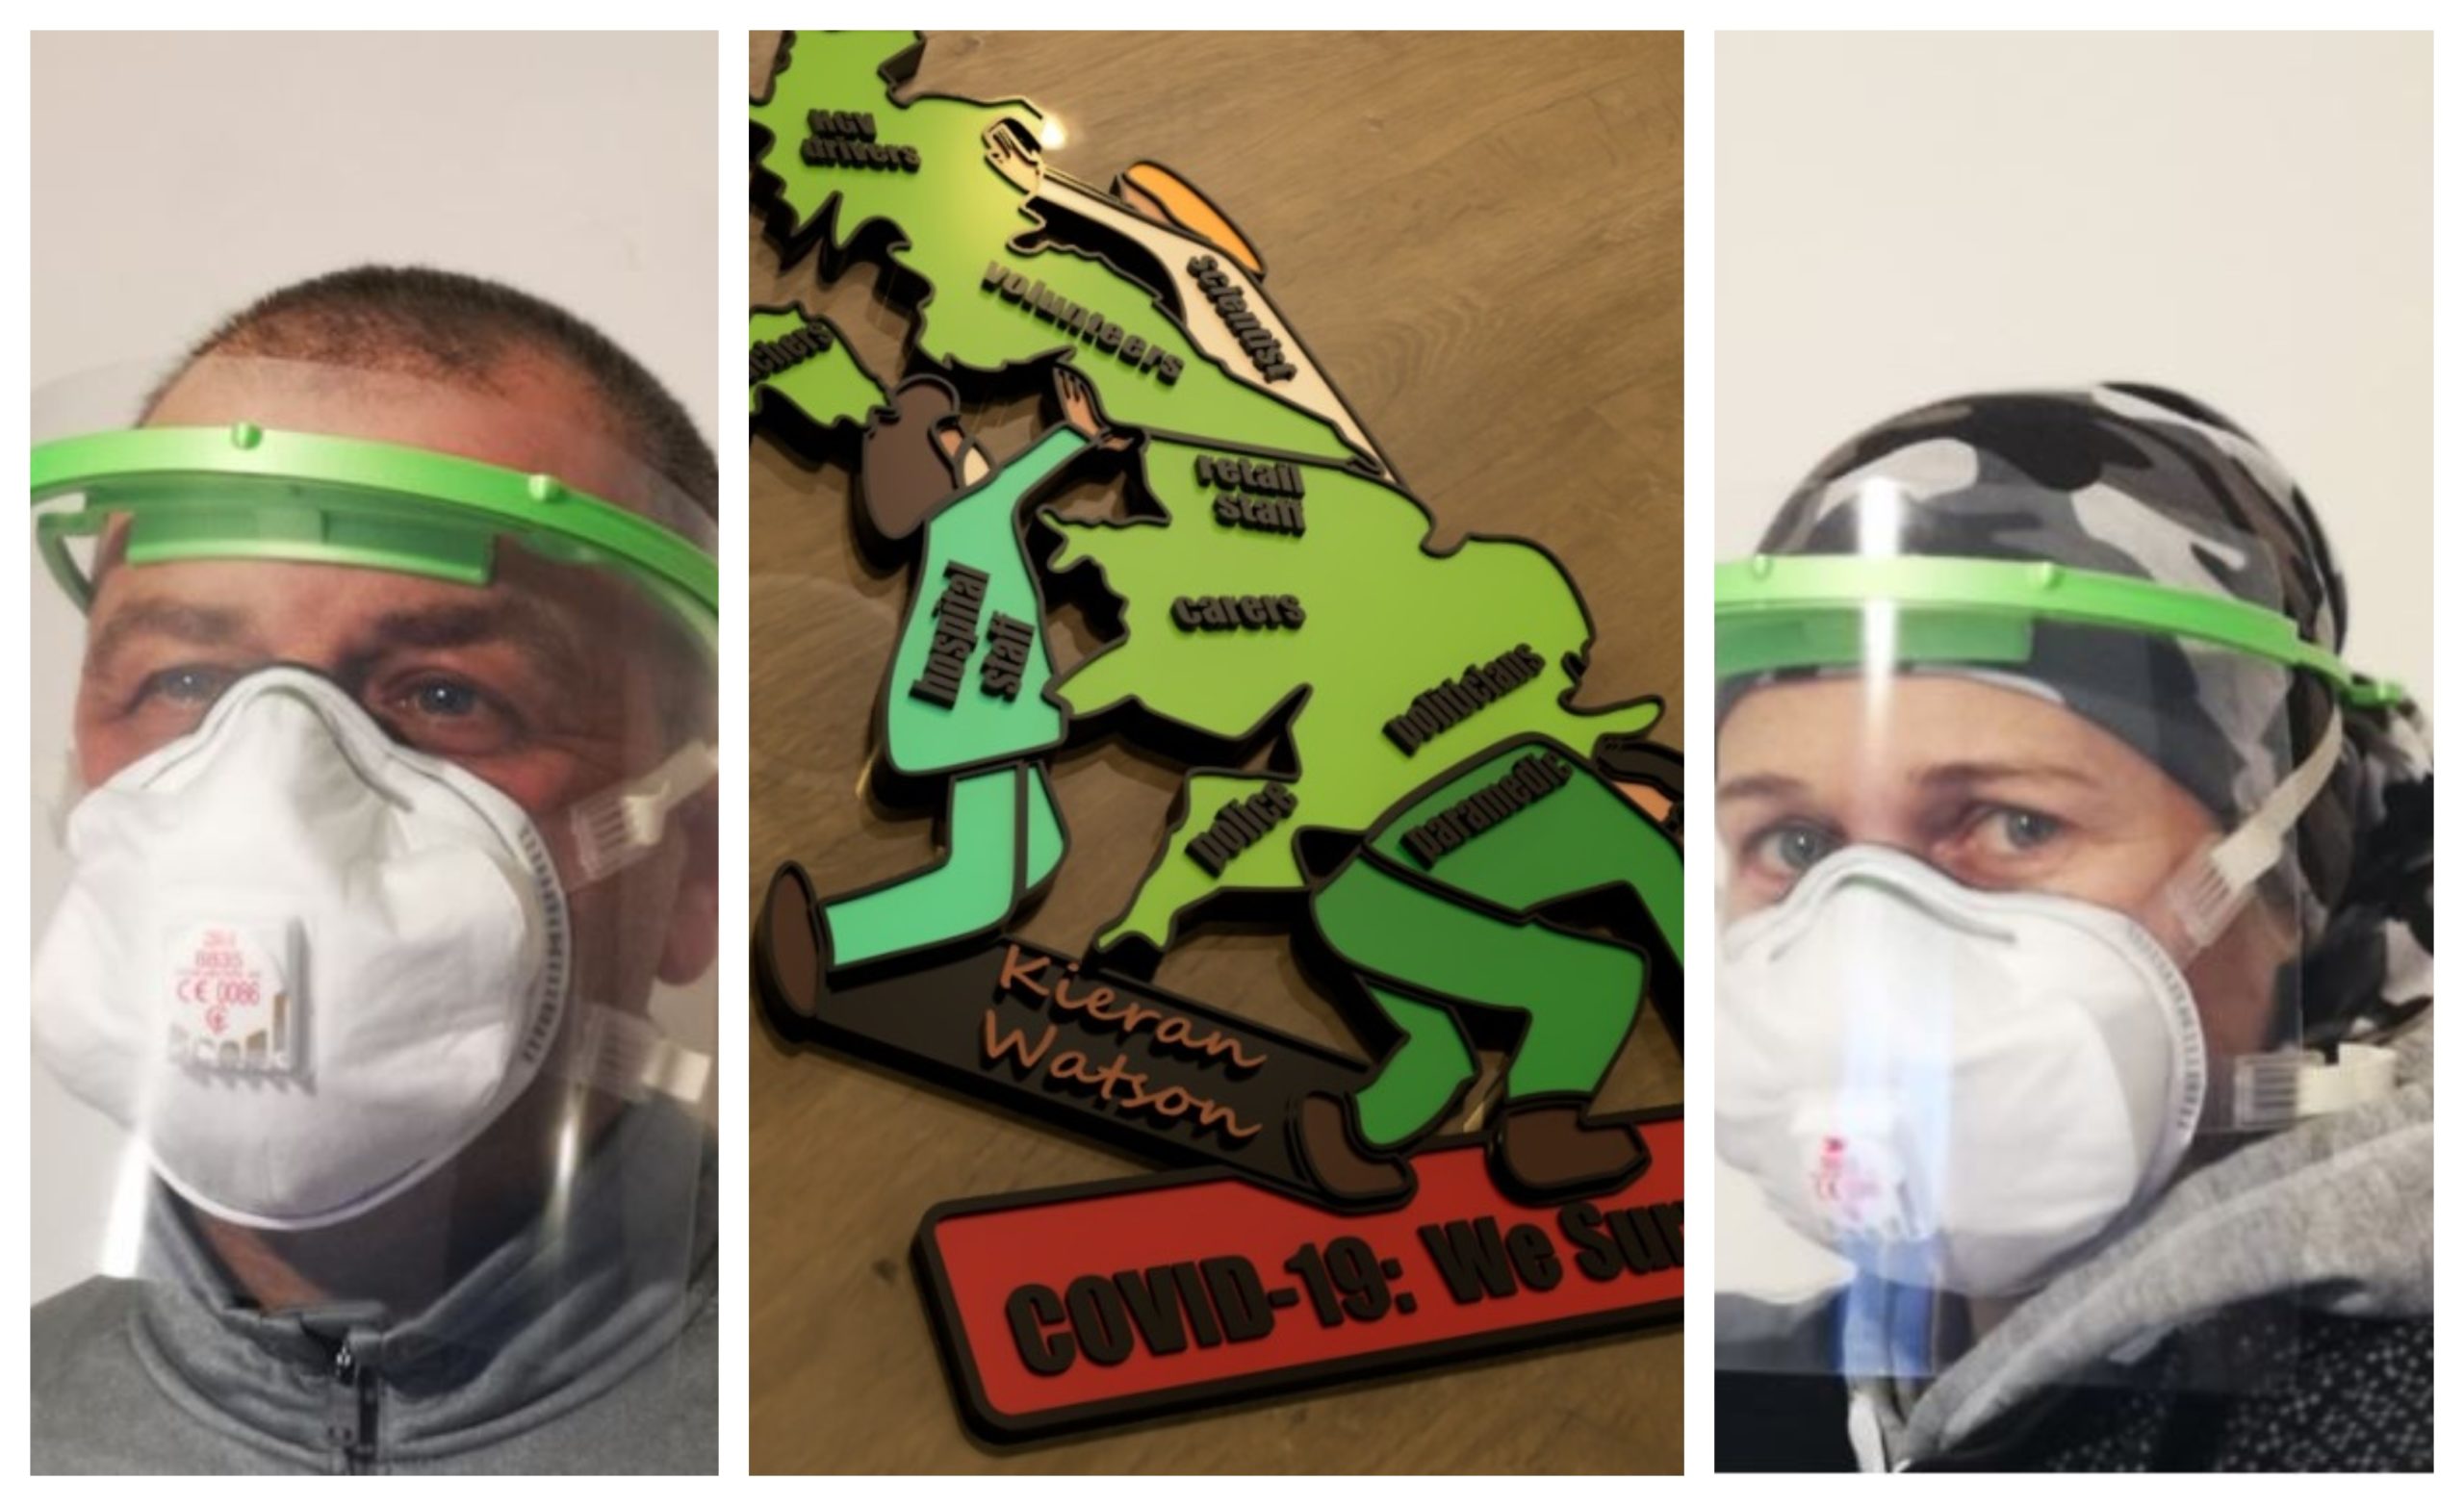 William Donald and Lyn Stewart are producing PPE and Covid-19 fridge magnets.